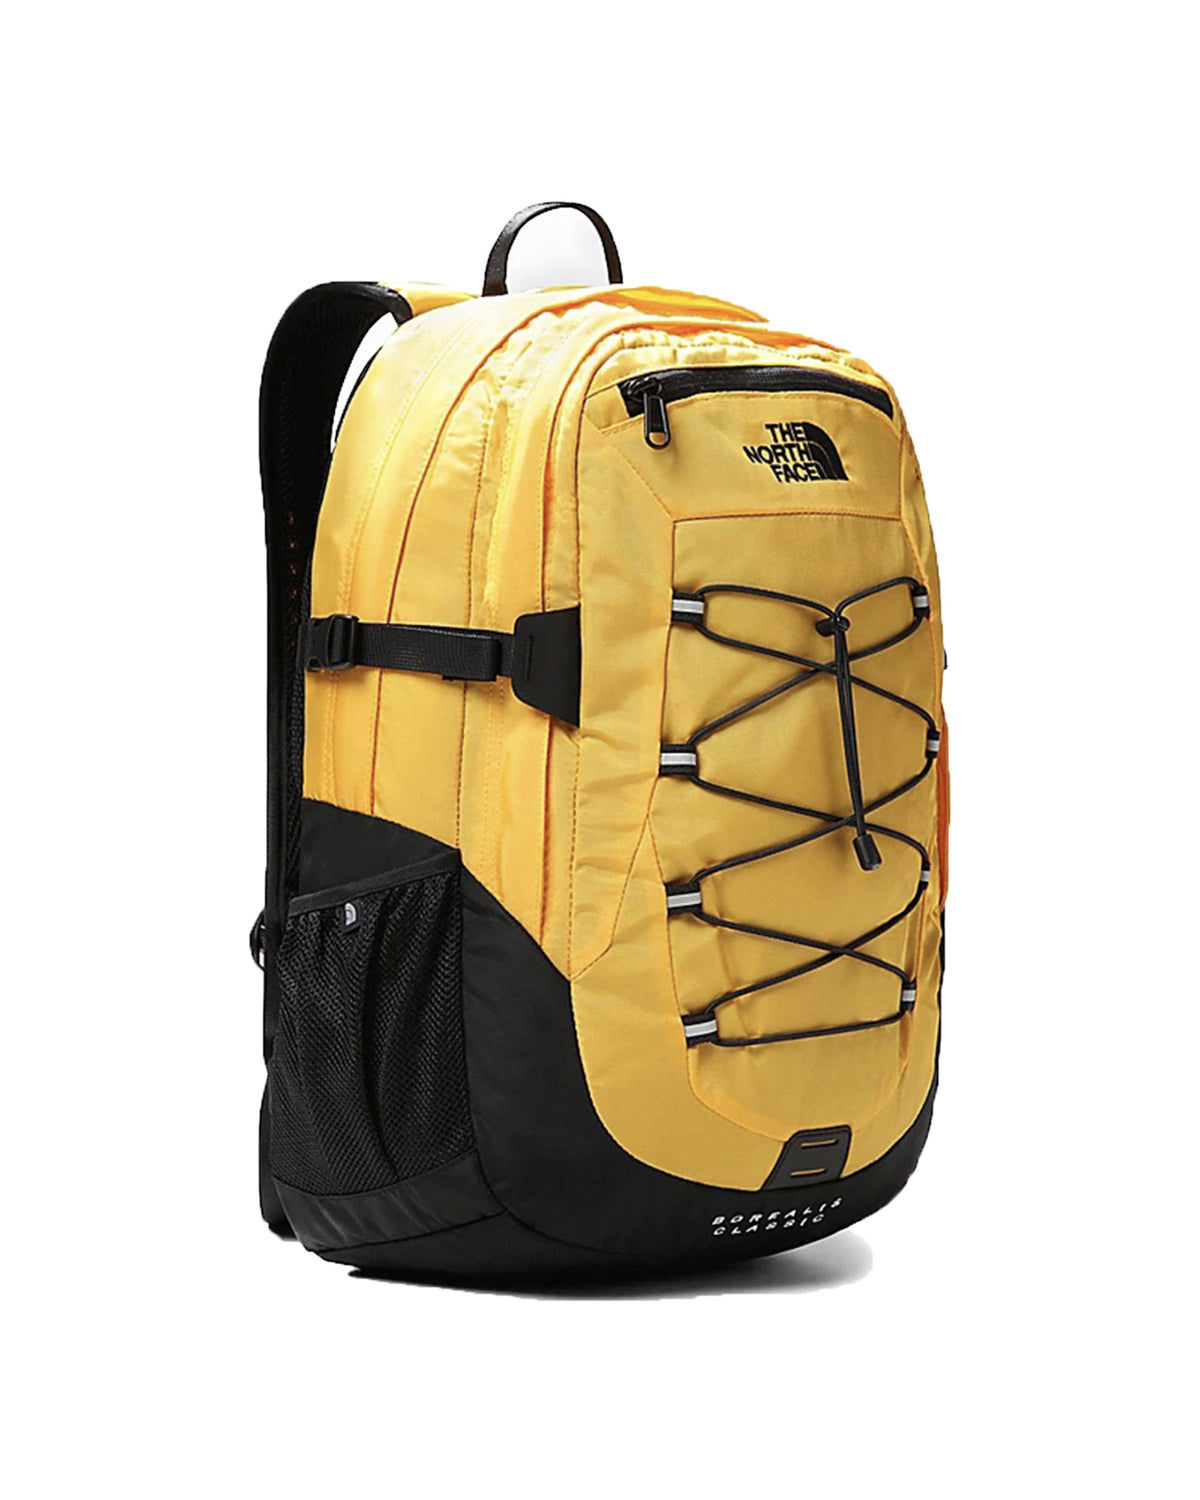 Backpack The North Face Borealis Classic Yellow